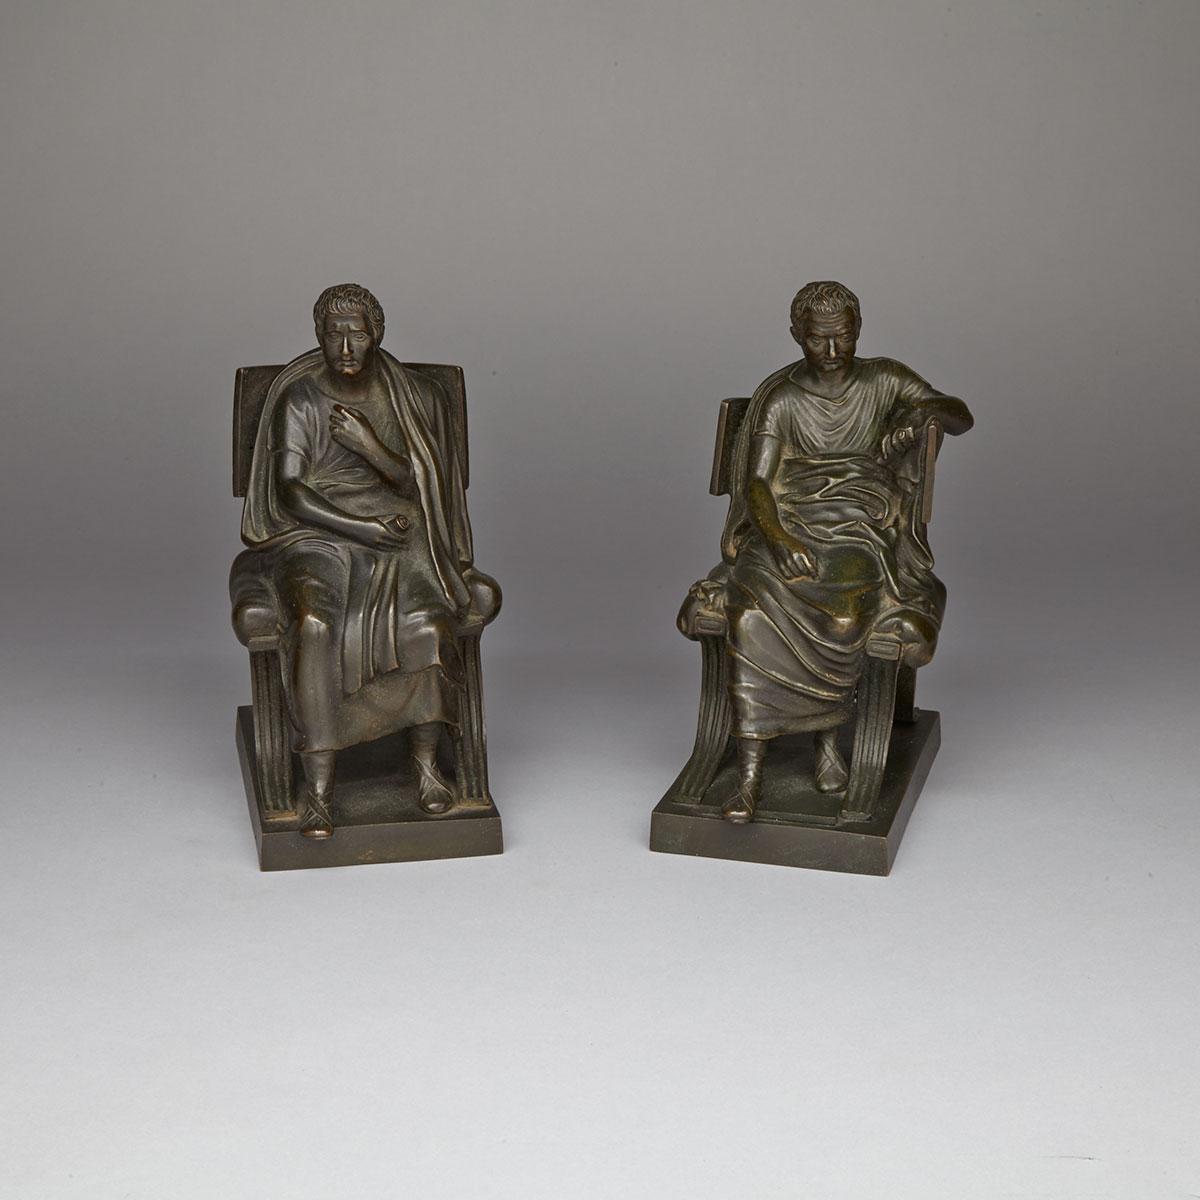 Pair of French Patinated Bronze Figures of Greek Philosophers, 19th century